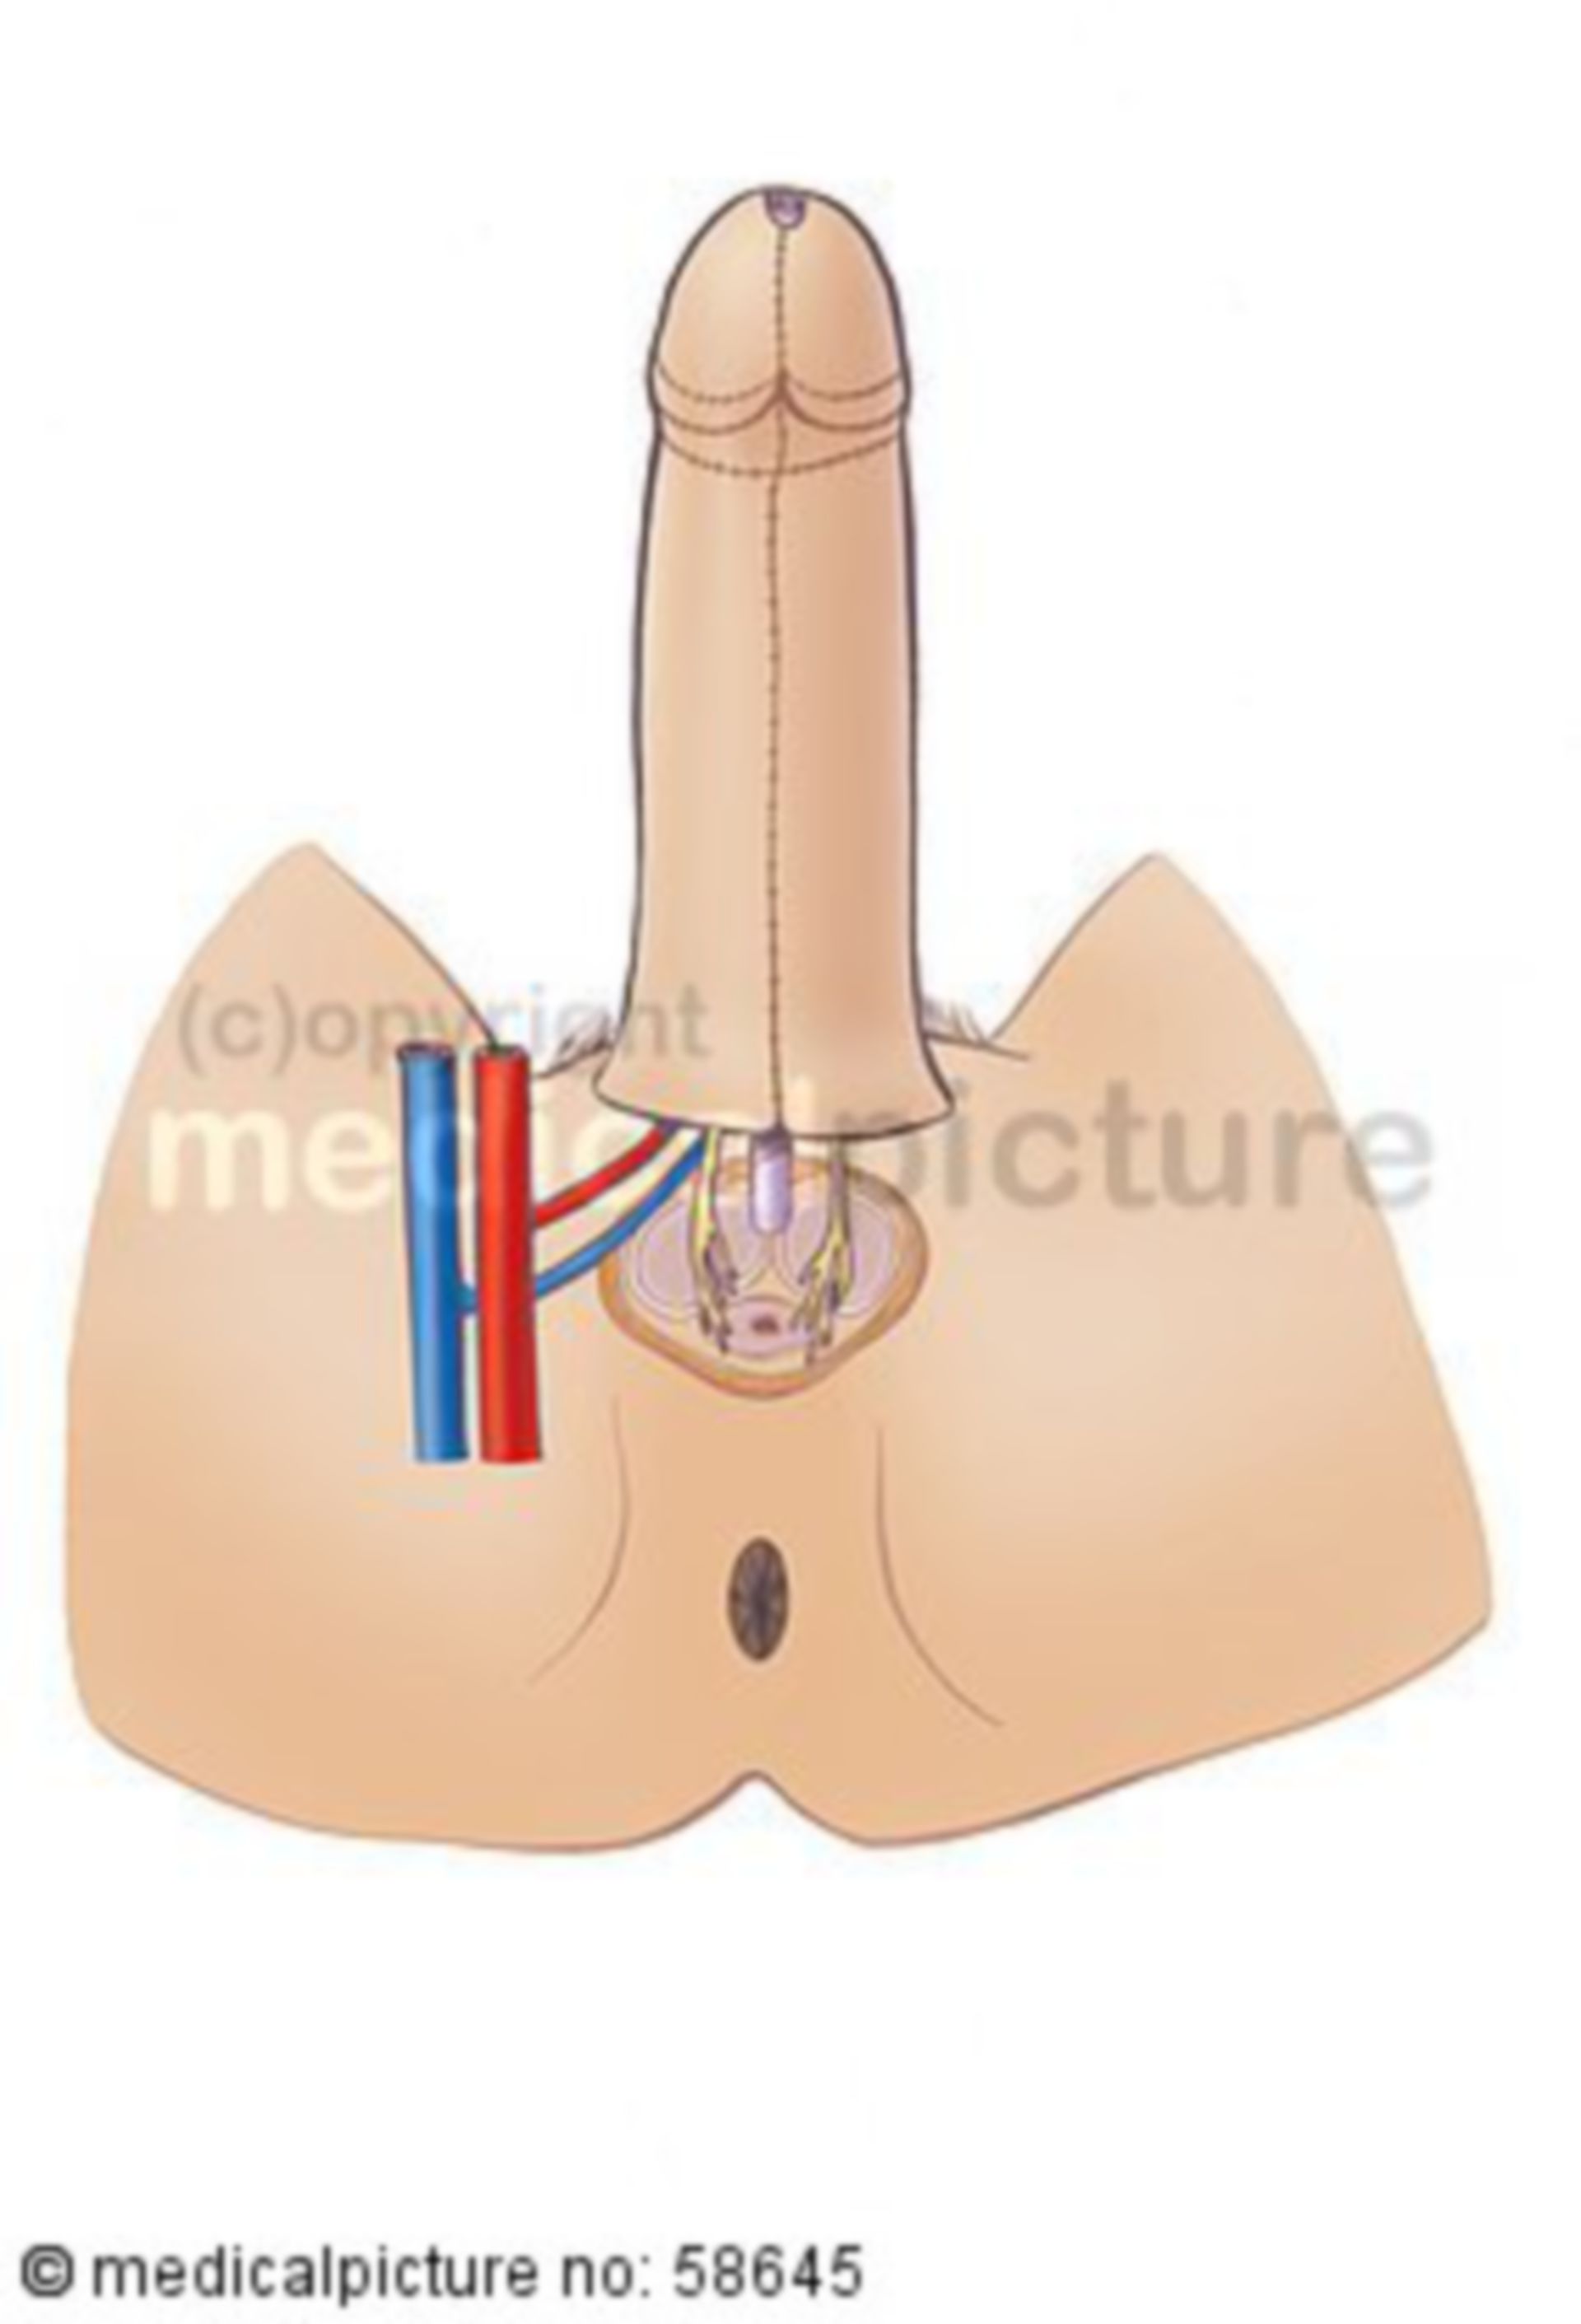 Penis-(re)construction (attachment to male anatomy)